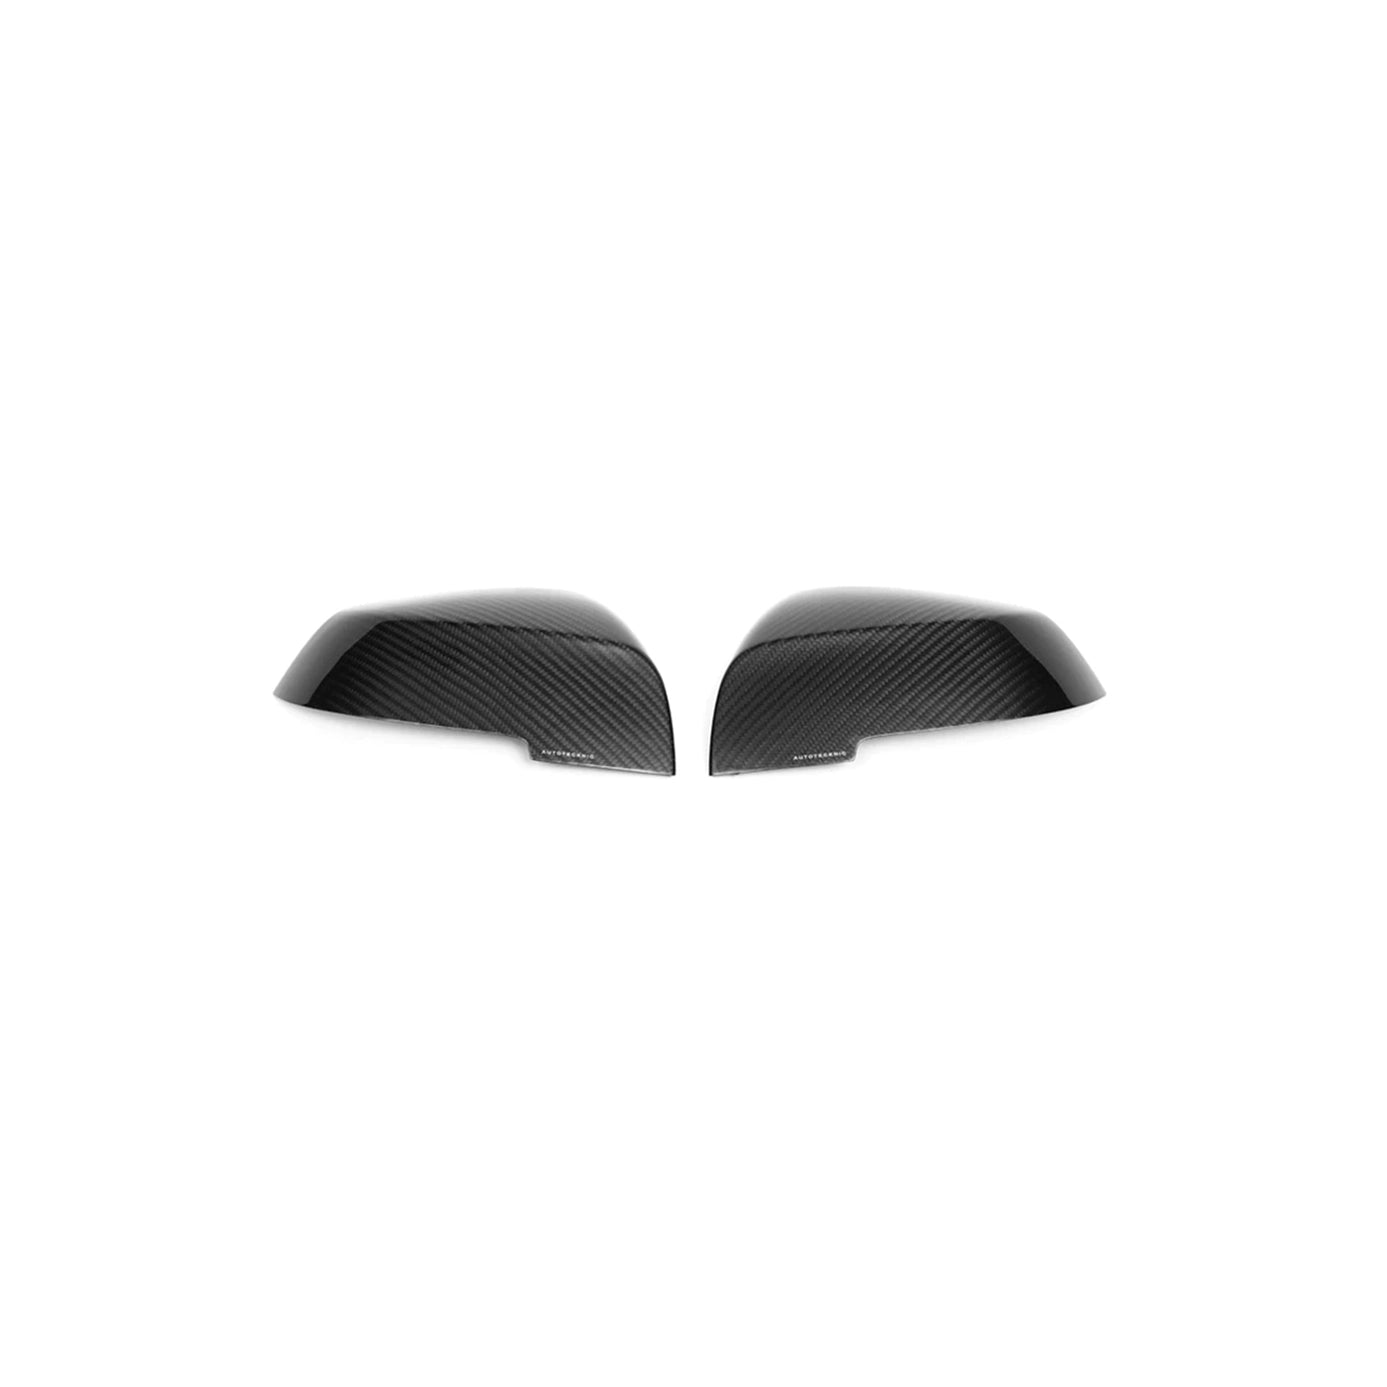 Autotecknic Replacement Dry Carbon Mirror Covers - E84 X1 | F20 1-Series | F22 2-Series | F30 3-Series | F32/ F36 4-Series | F87 M2